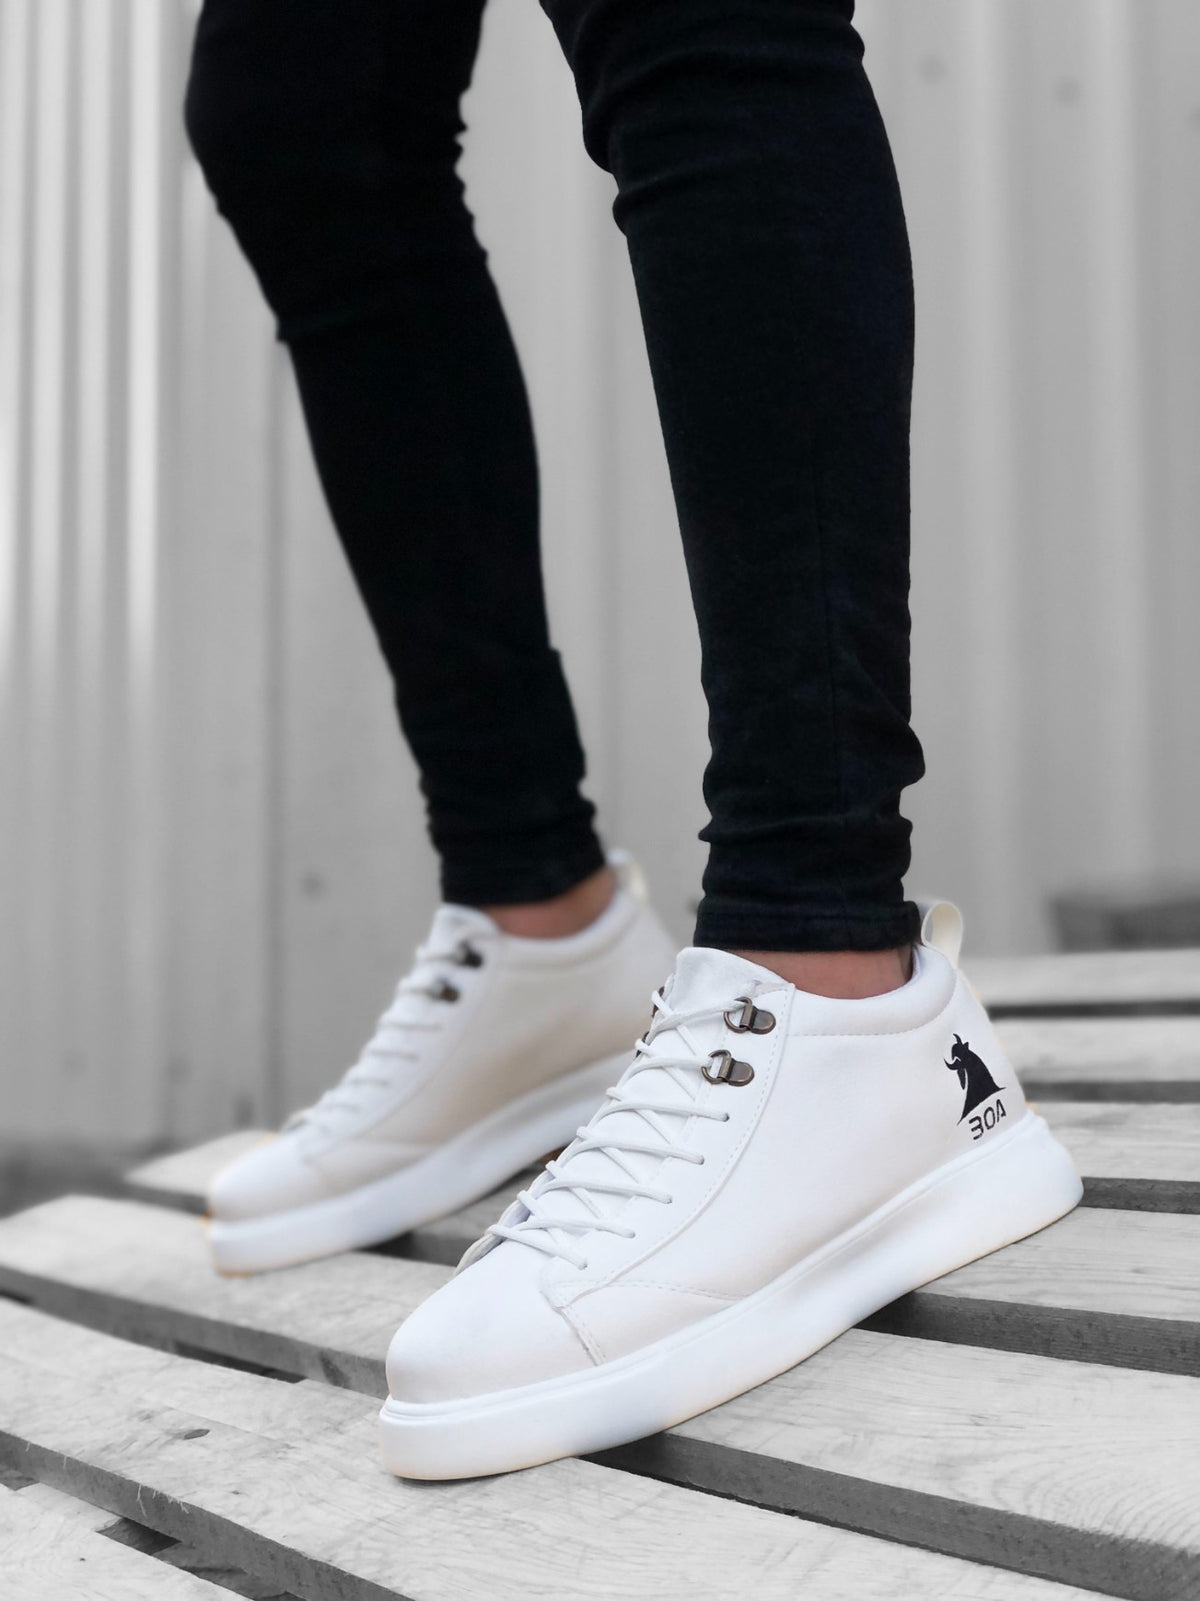 BA0220 Lace-up Men's High Sole White Sole Sports Shoes sneakers - STREETMODE ™